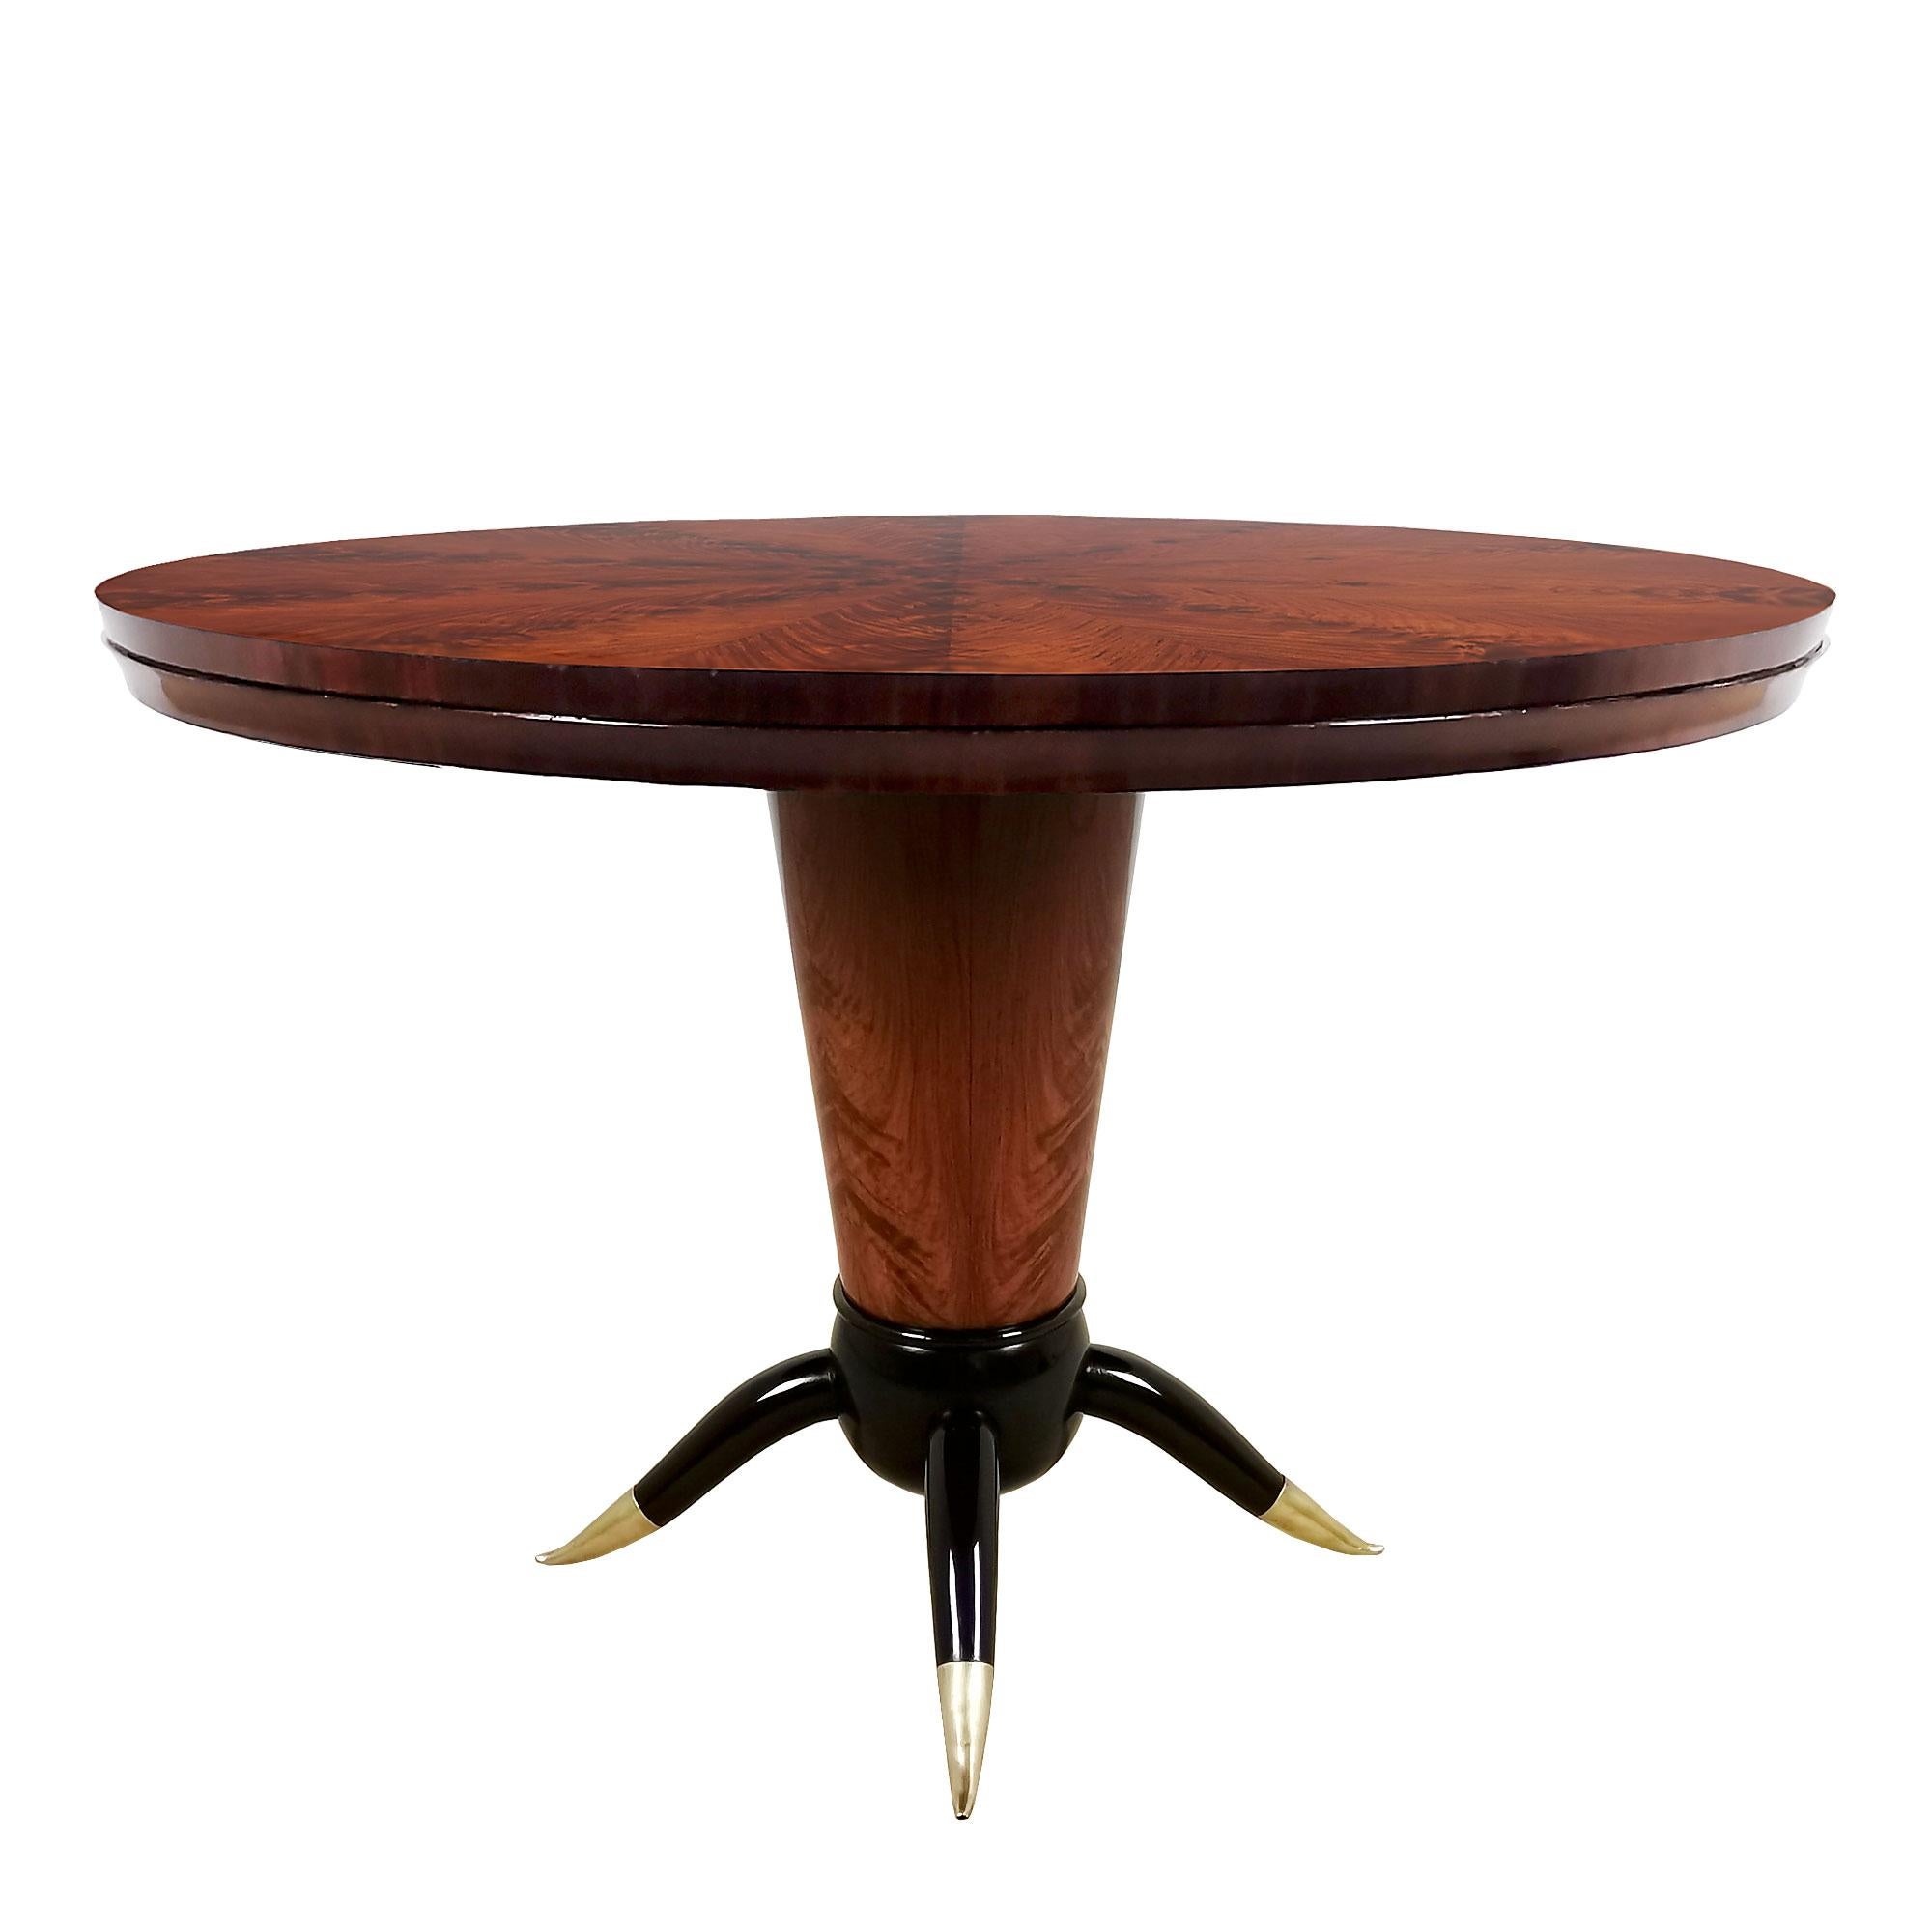 Italian  Mid-Century Modern Center Table in Solid Wood and brass feet - Italy 1940 For Sale